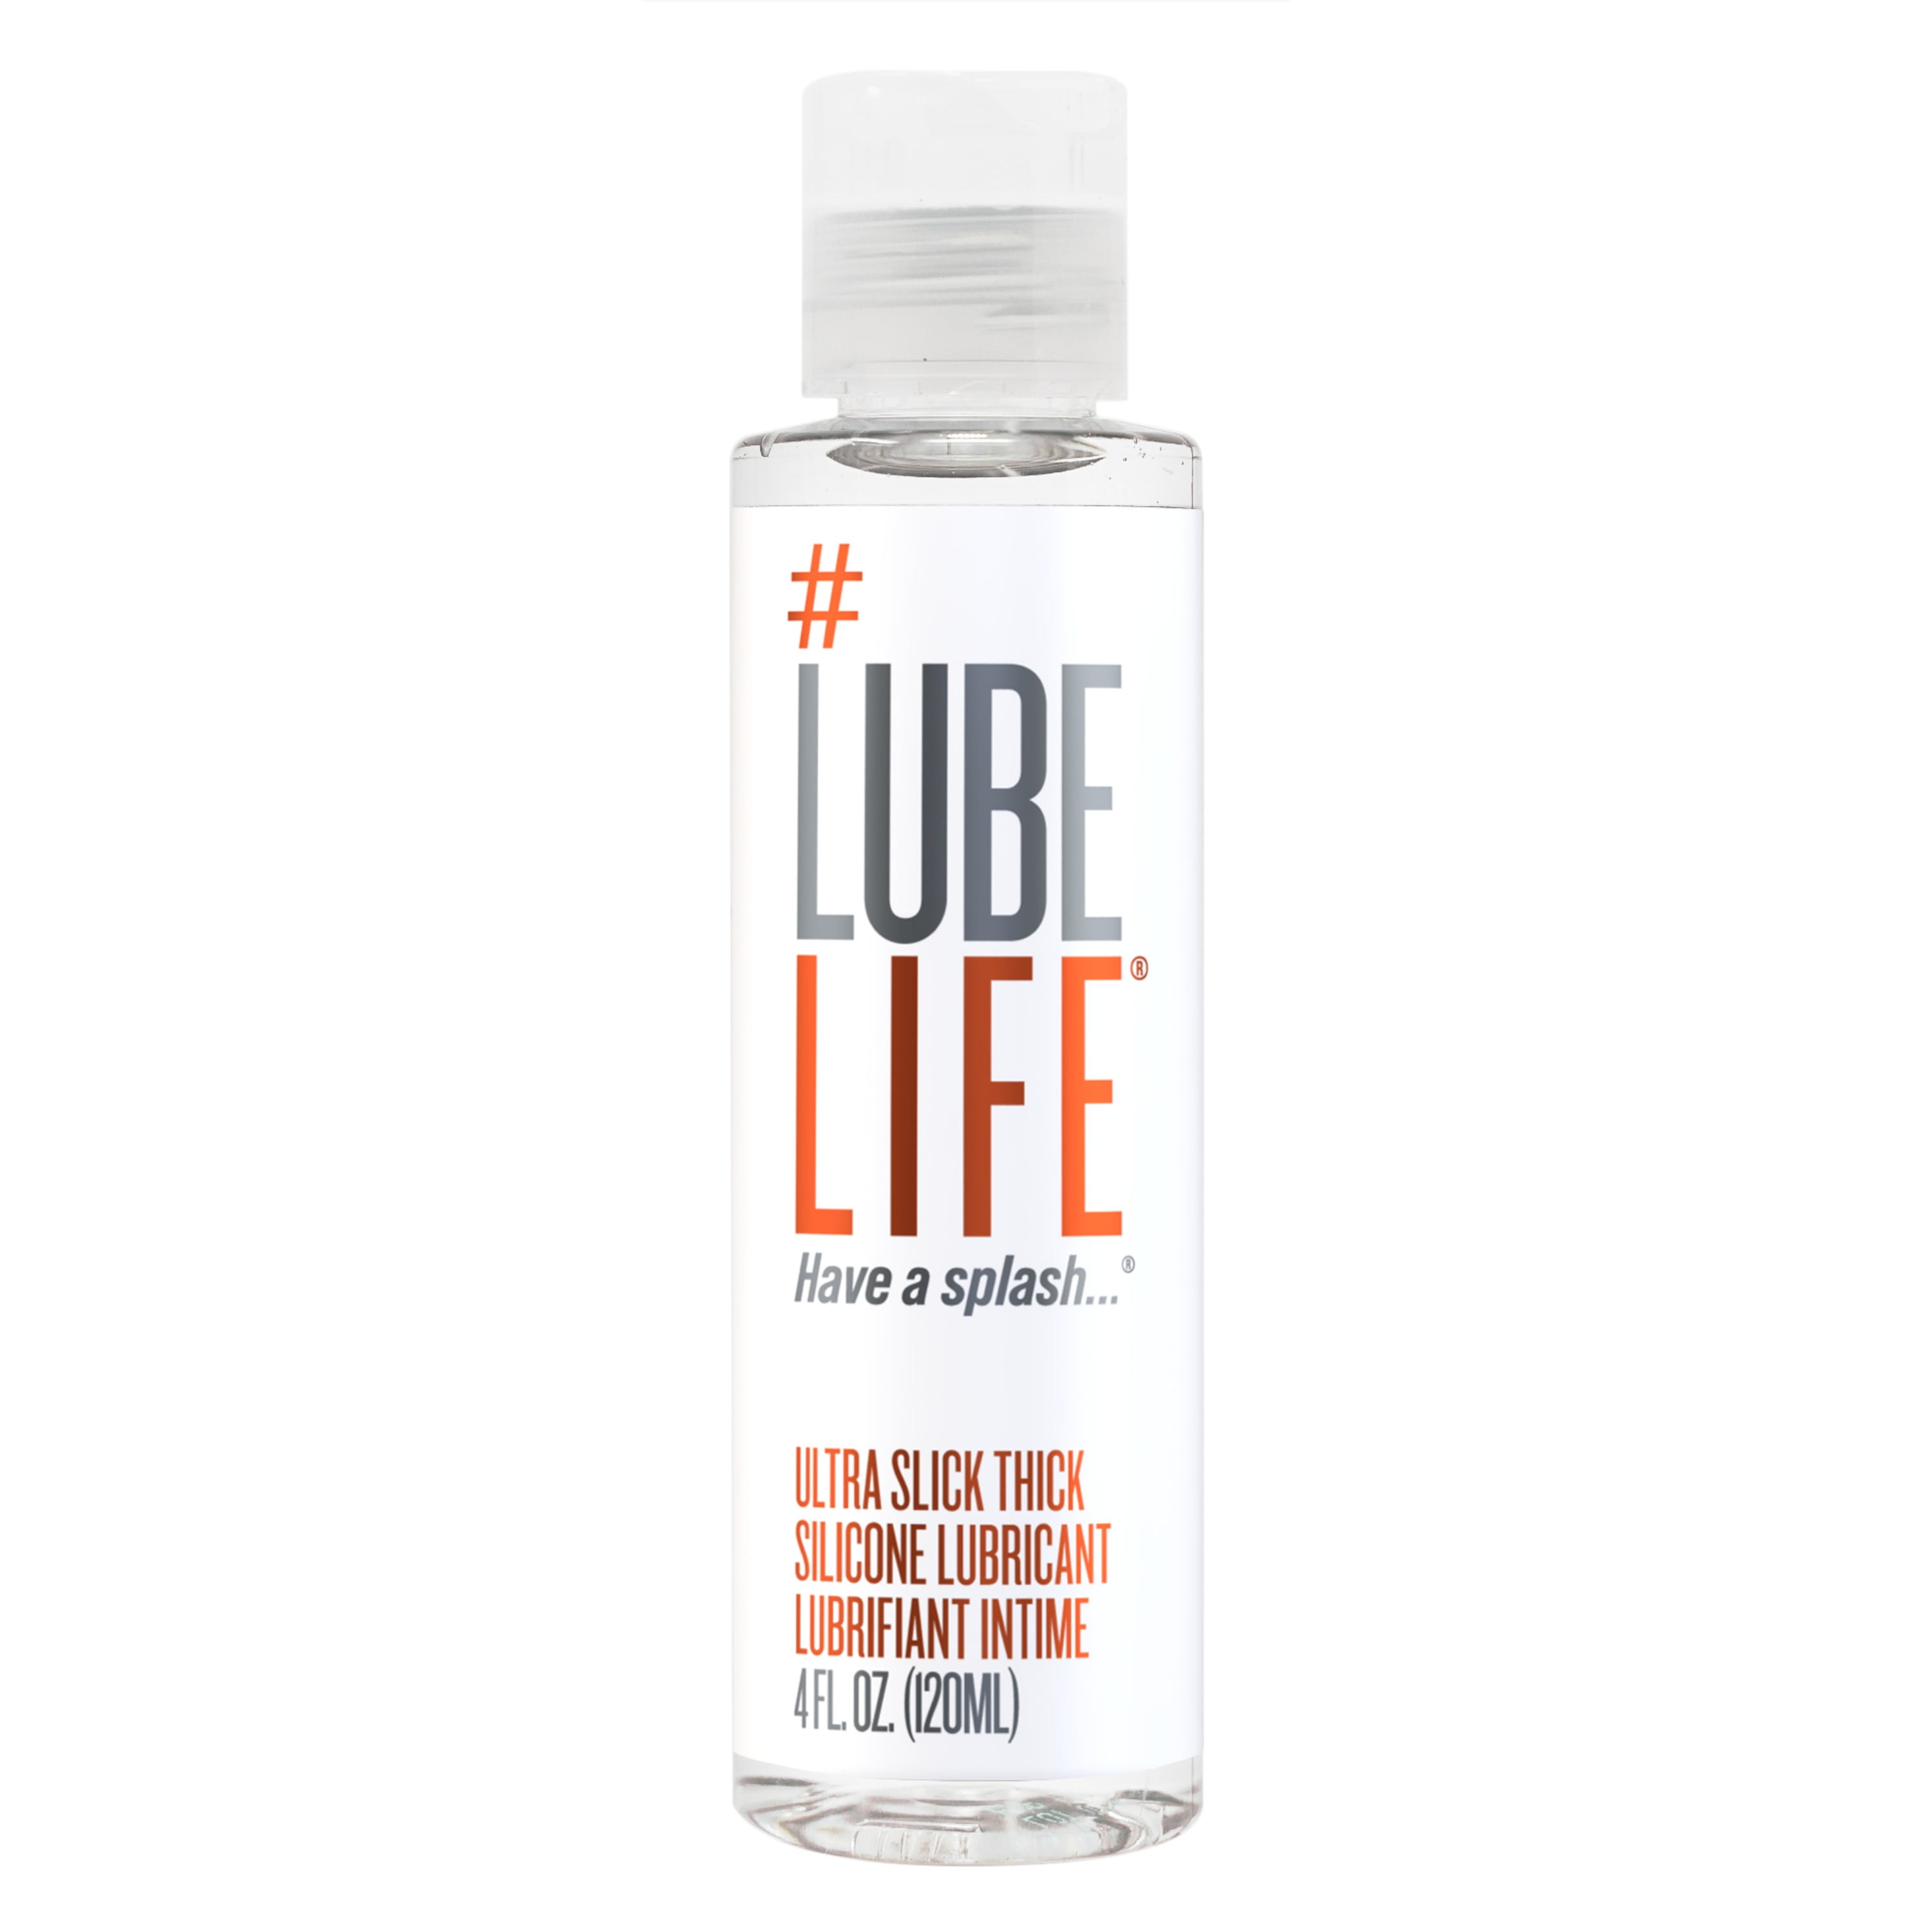 Lube Life Water-Based Actively Trying Fertility Lubricant, Fertility  Friendly Lube for Men, Women and Couples, 2 Fl Oz